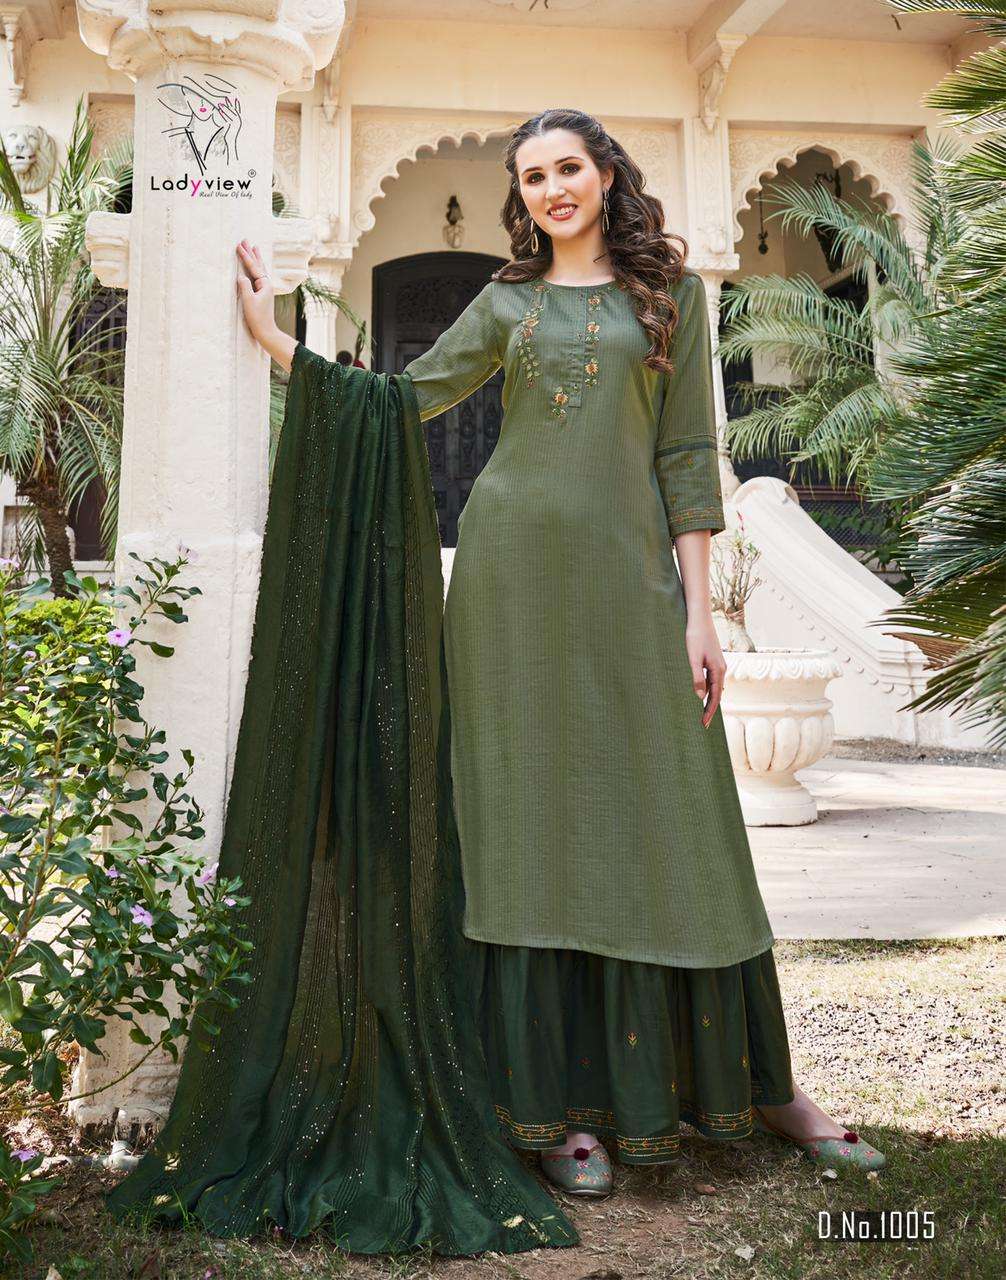 Ladyview Heer Catalog Exclusive Wear Ready made Collection 